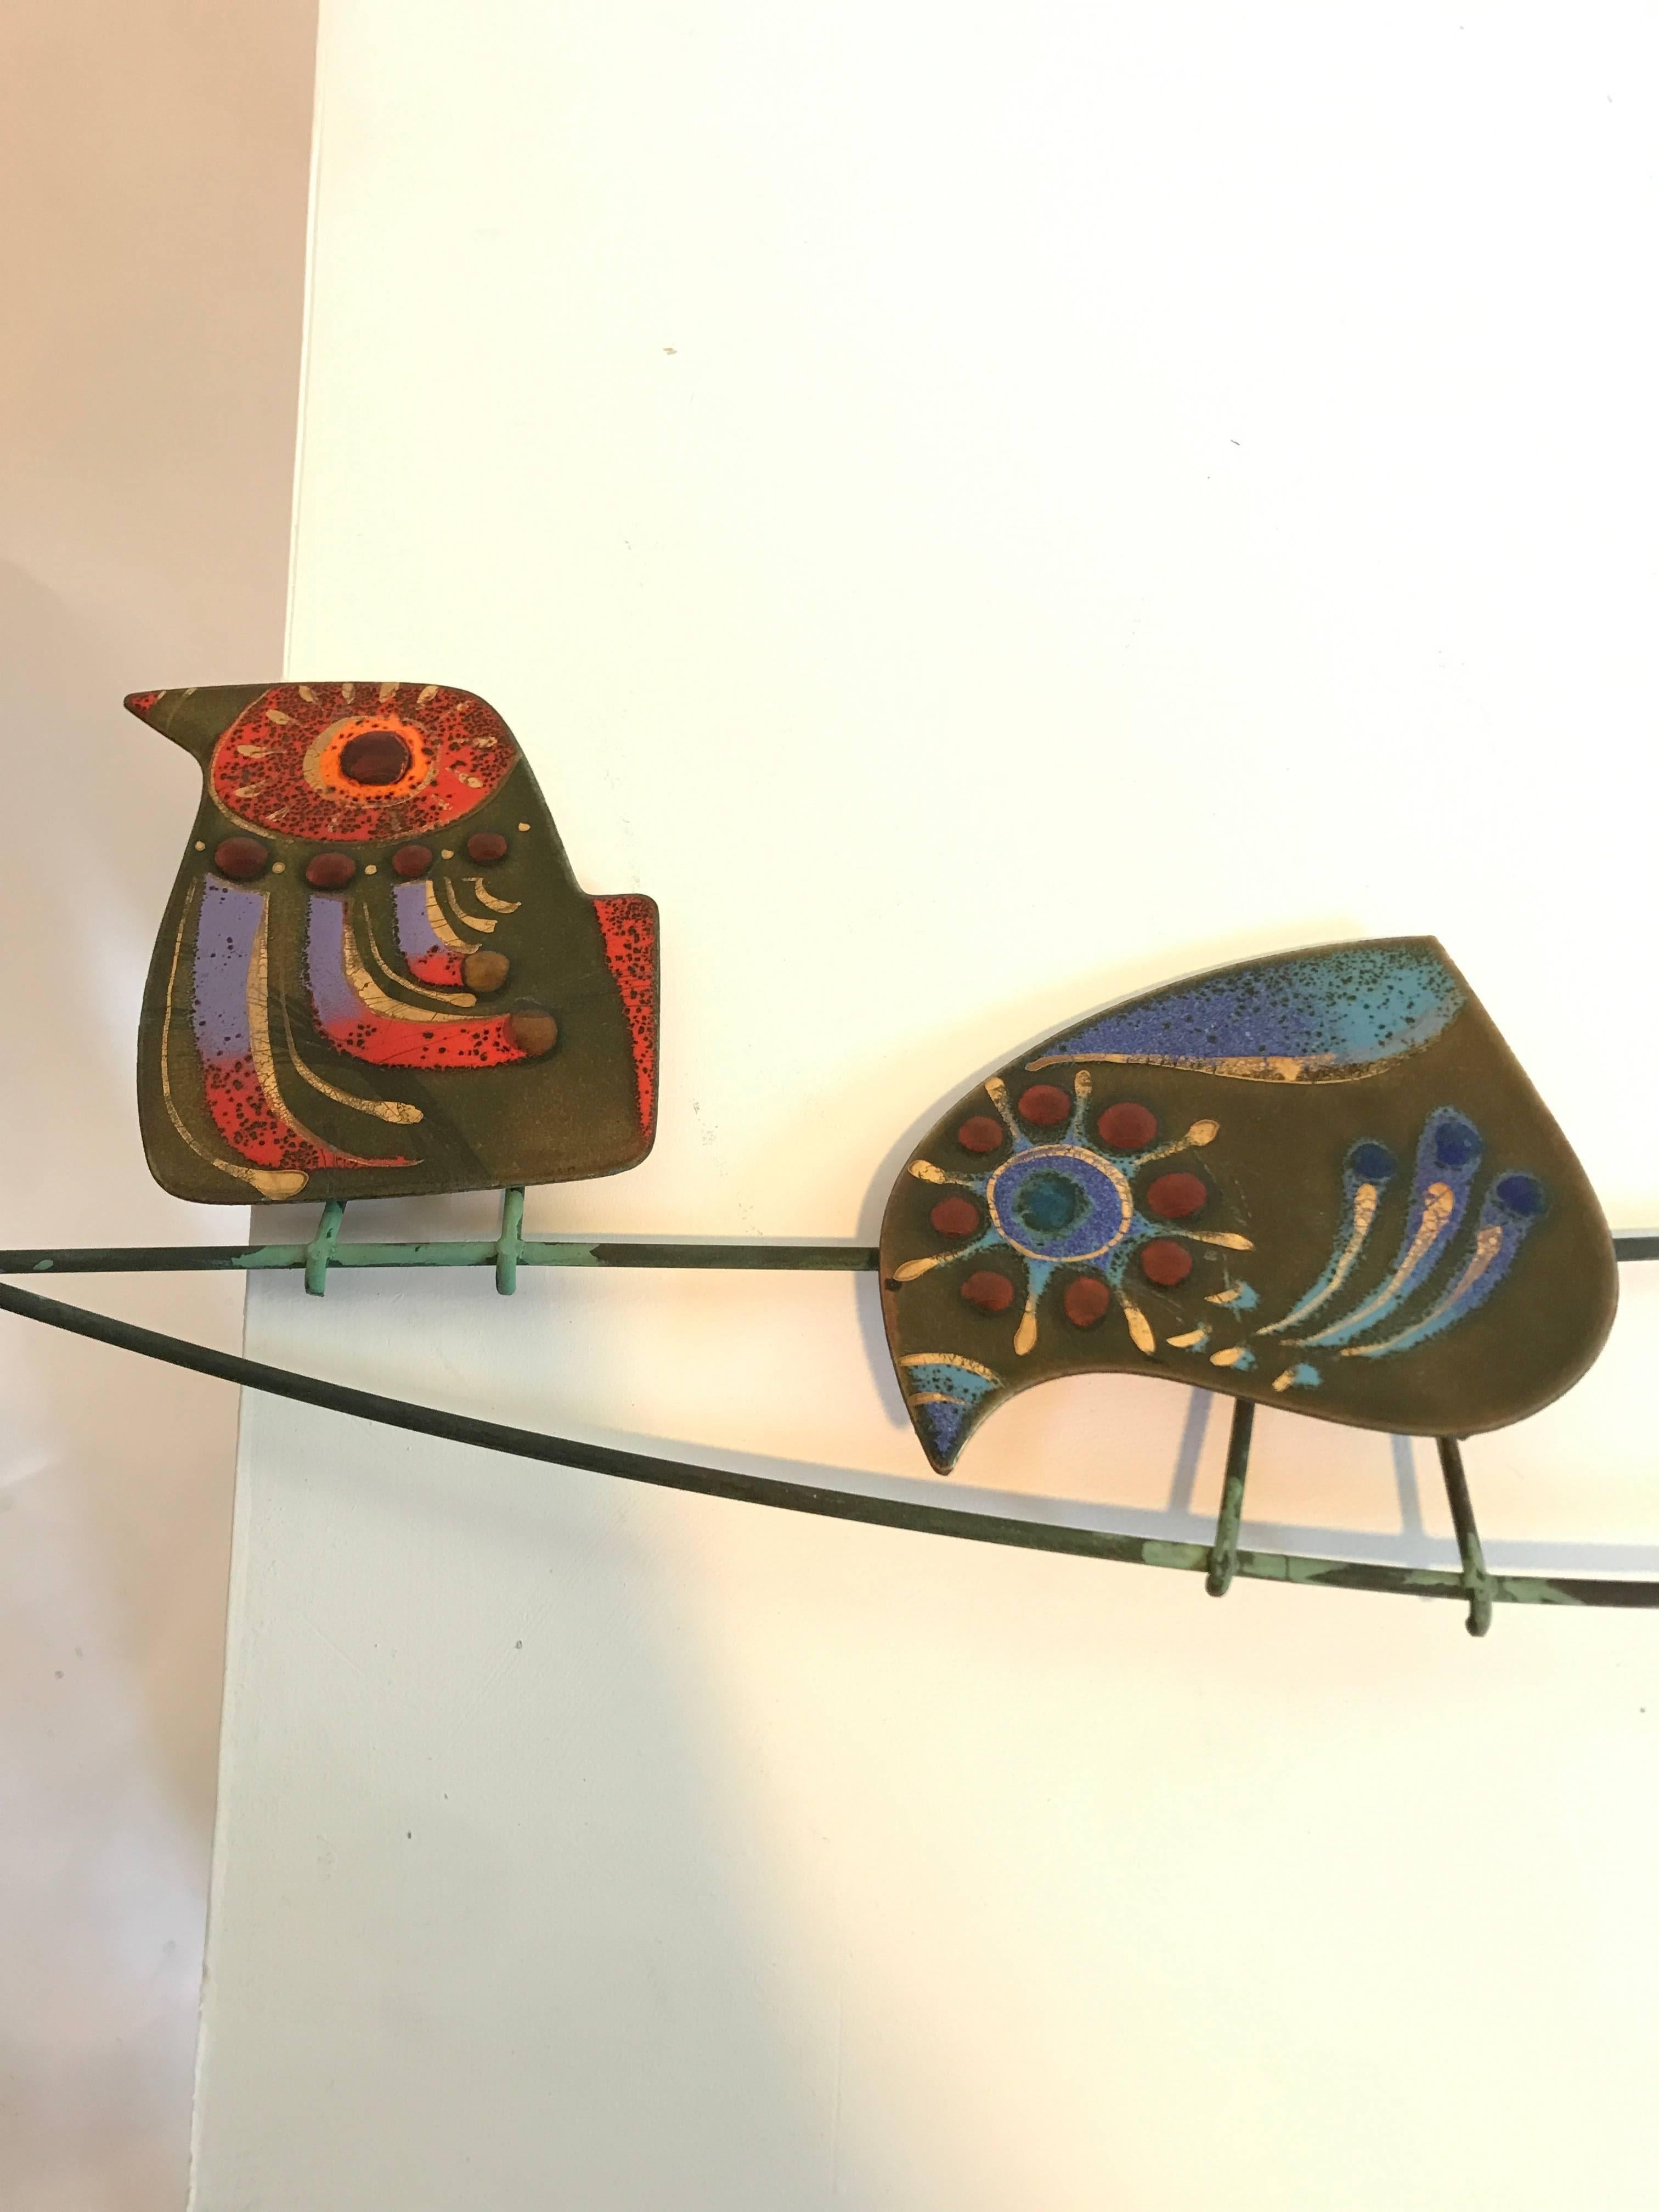 Enameled birds on a wire by Curtis Jere, circa 1986 
Signed C. Jere on last bird on the right (see photo detail) 

Curtis Jeré is the nom-de-plume of artists Jerry Fels and Curtis Freiler. Their collaboration started in the late 1950s, and